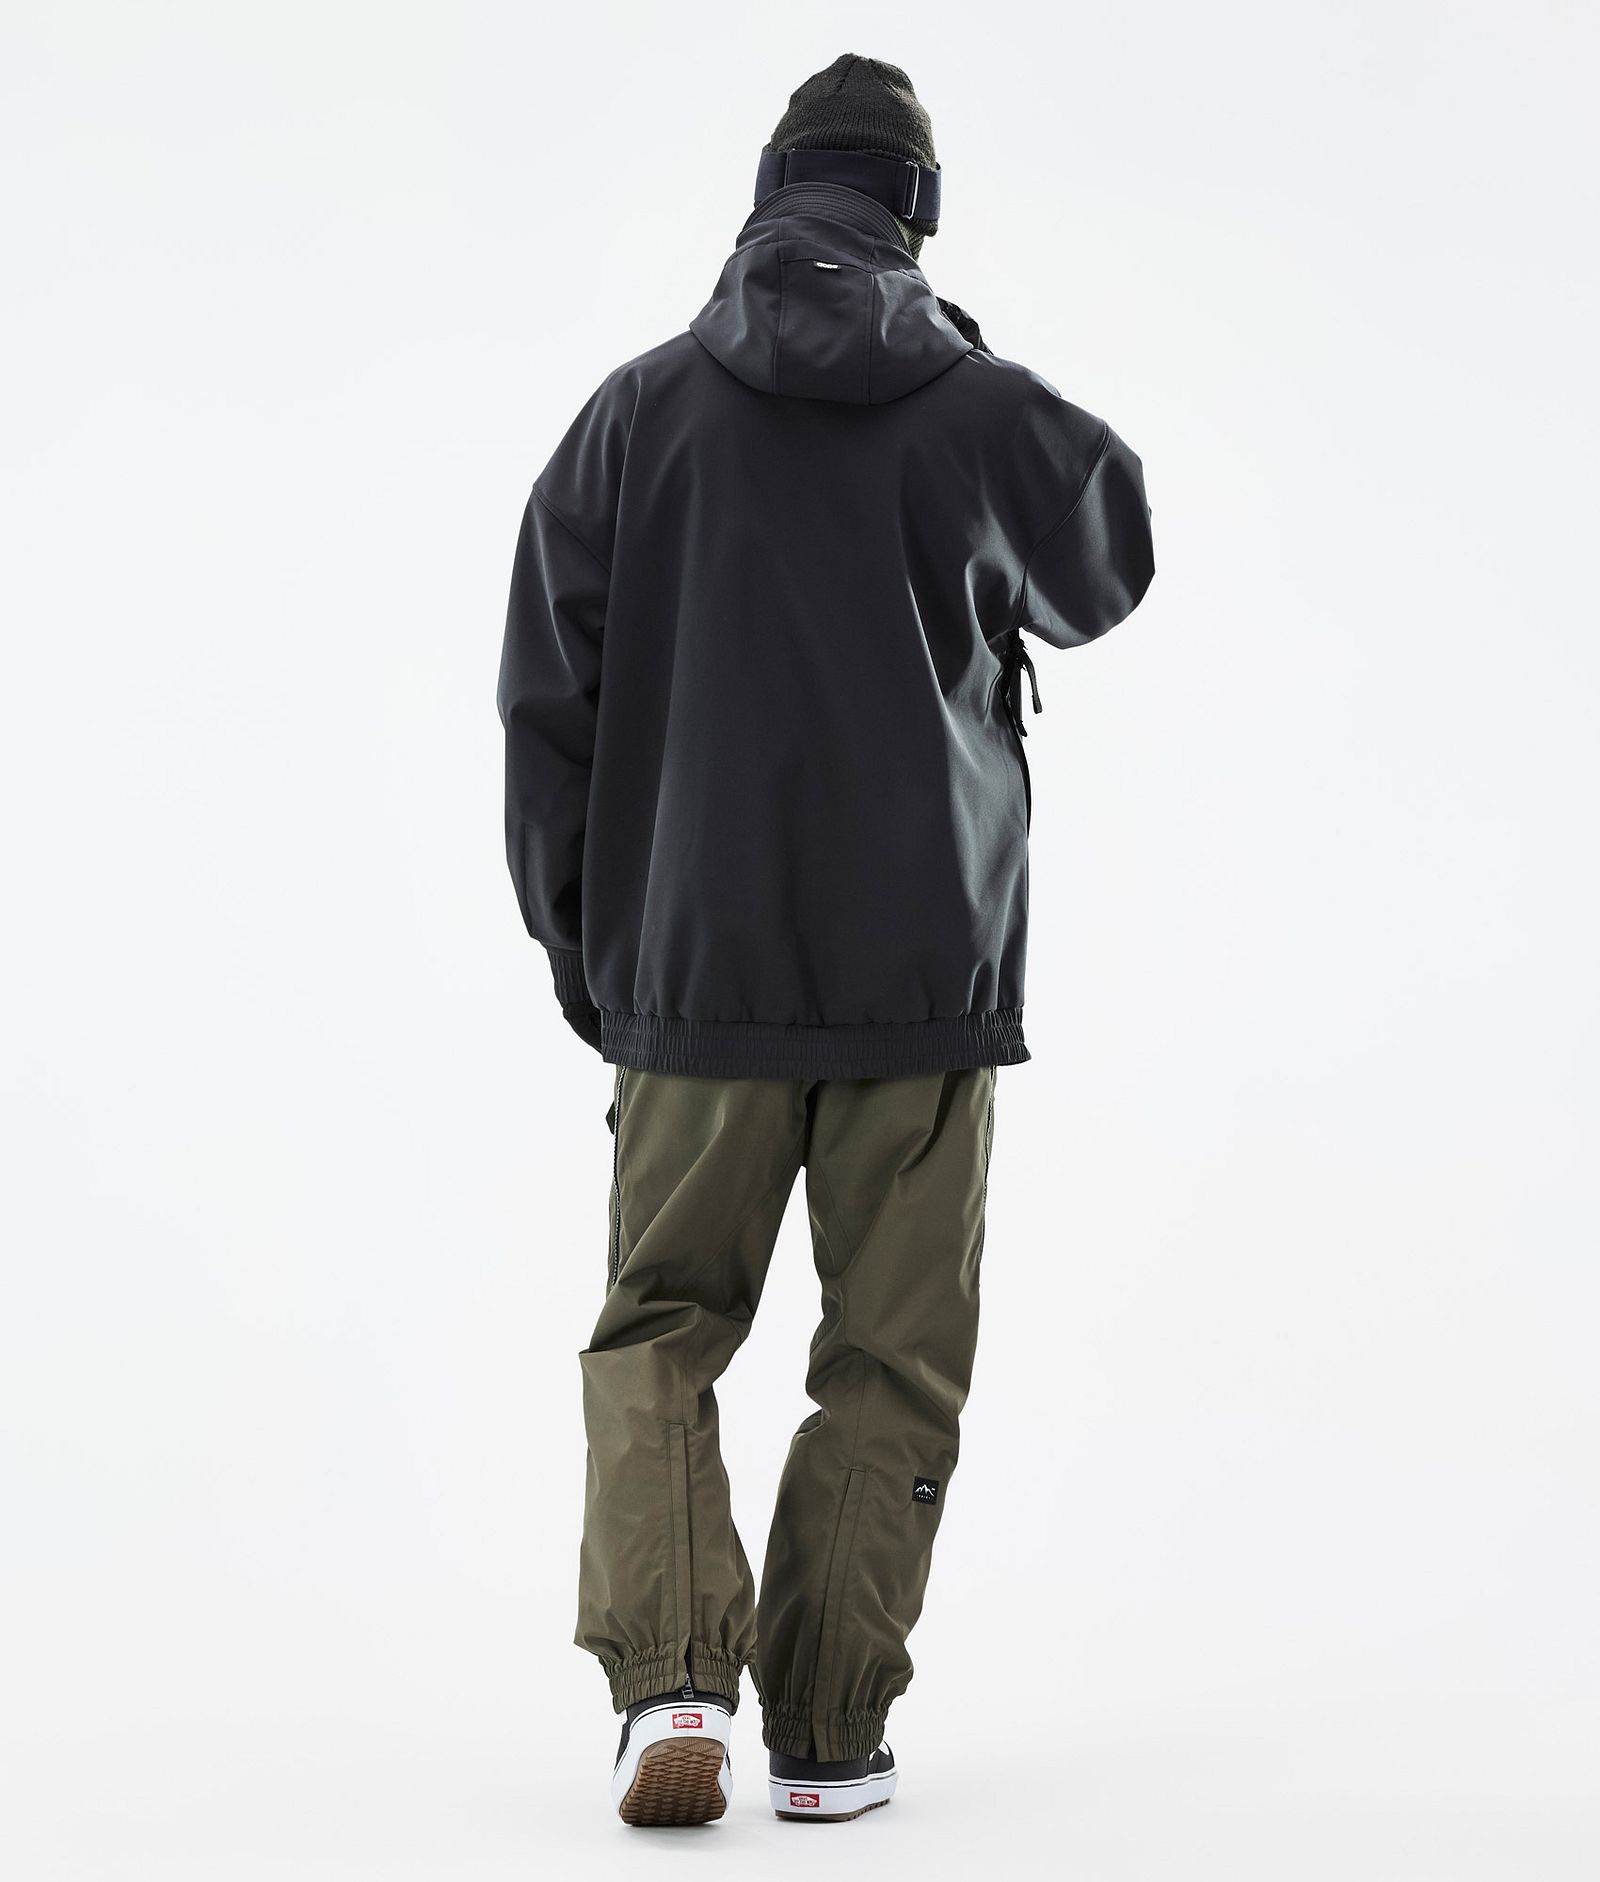 Dope Cyclone Outfit de Snowboard Hombre Black/Olive Green, Image 2 of 2